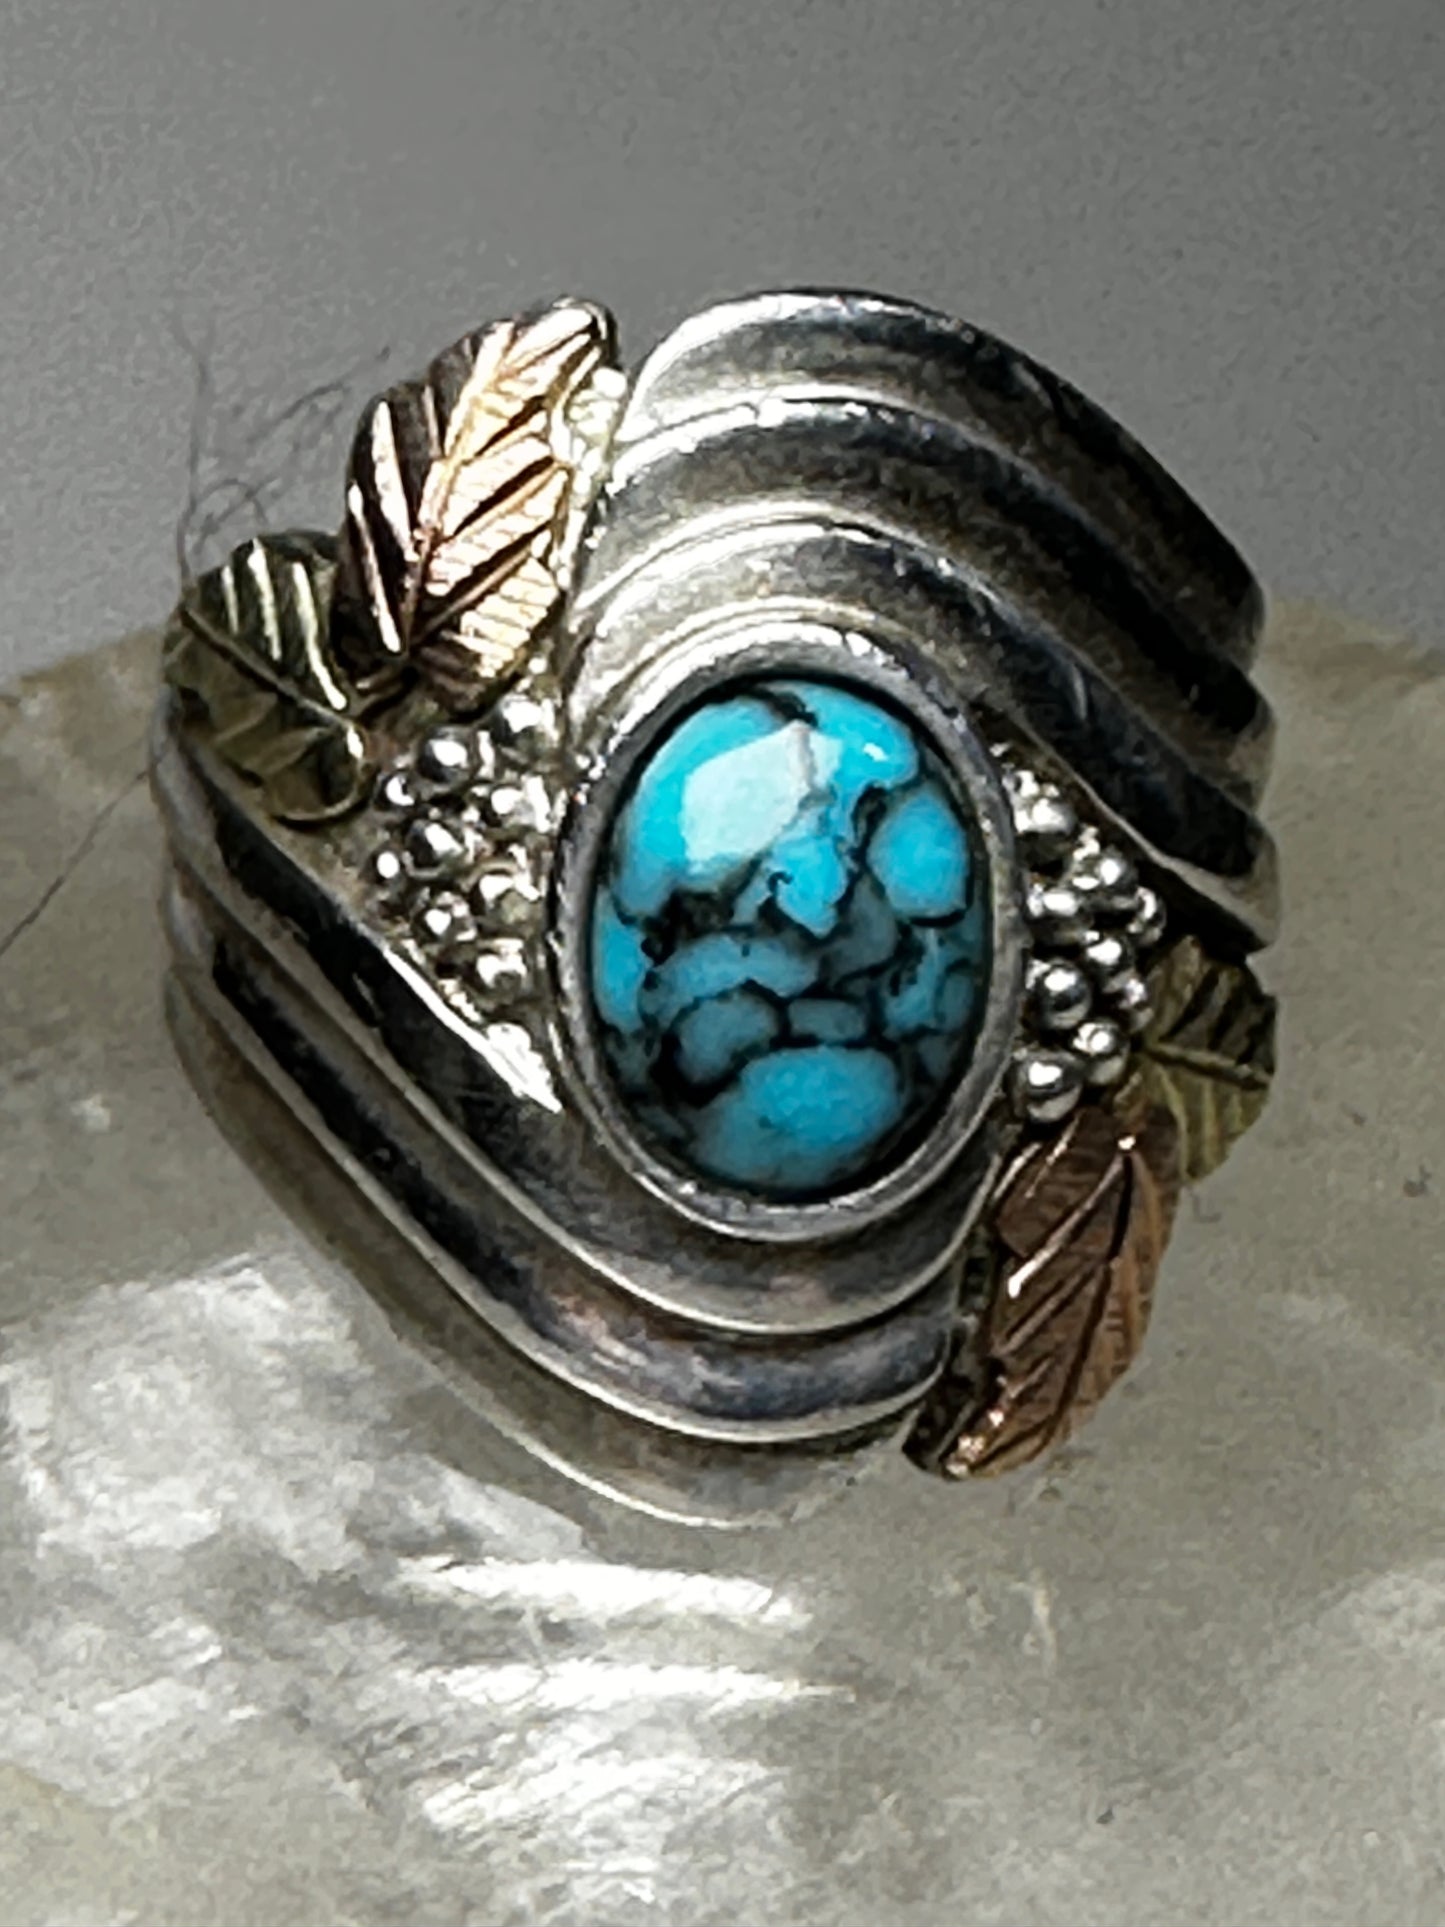 Black Hills Gold ring turquoise size 4.75 sterling silver women  girls